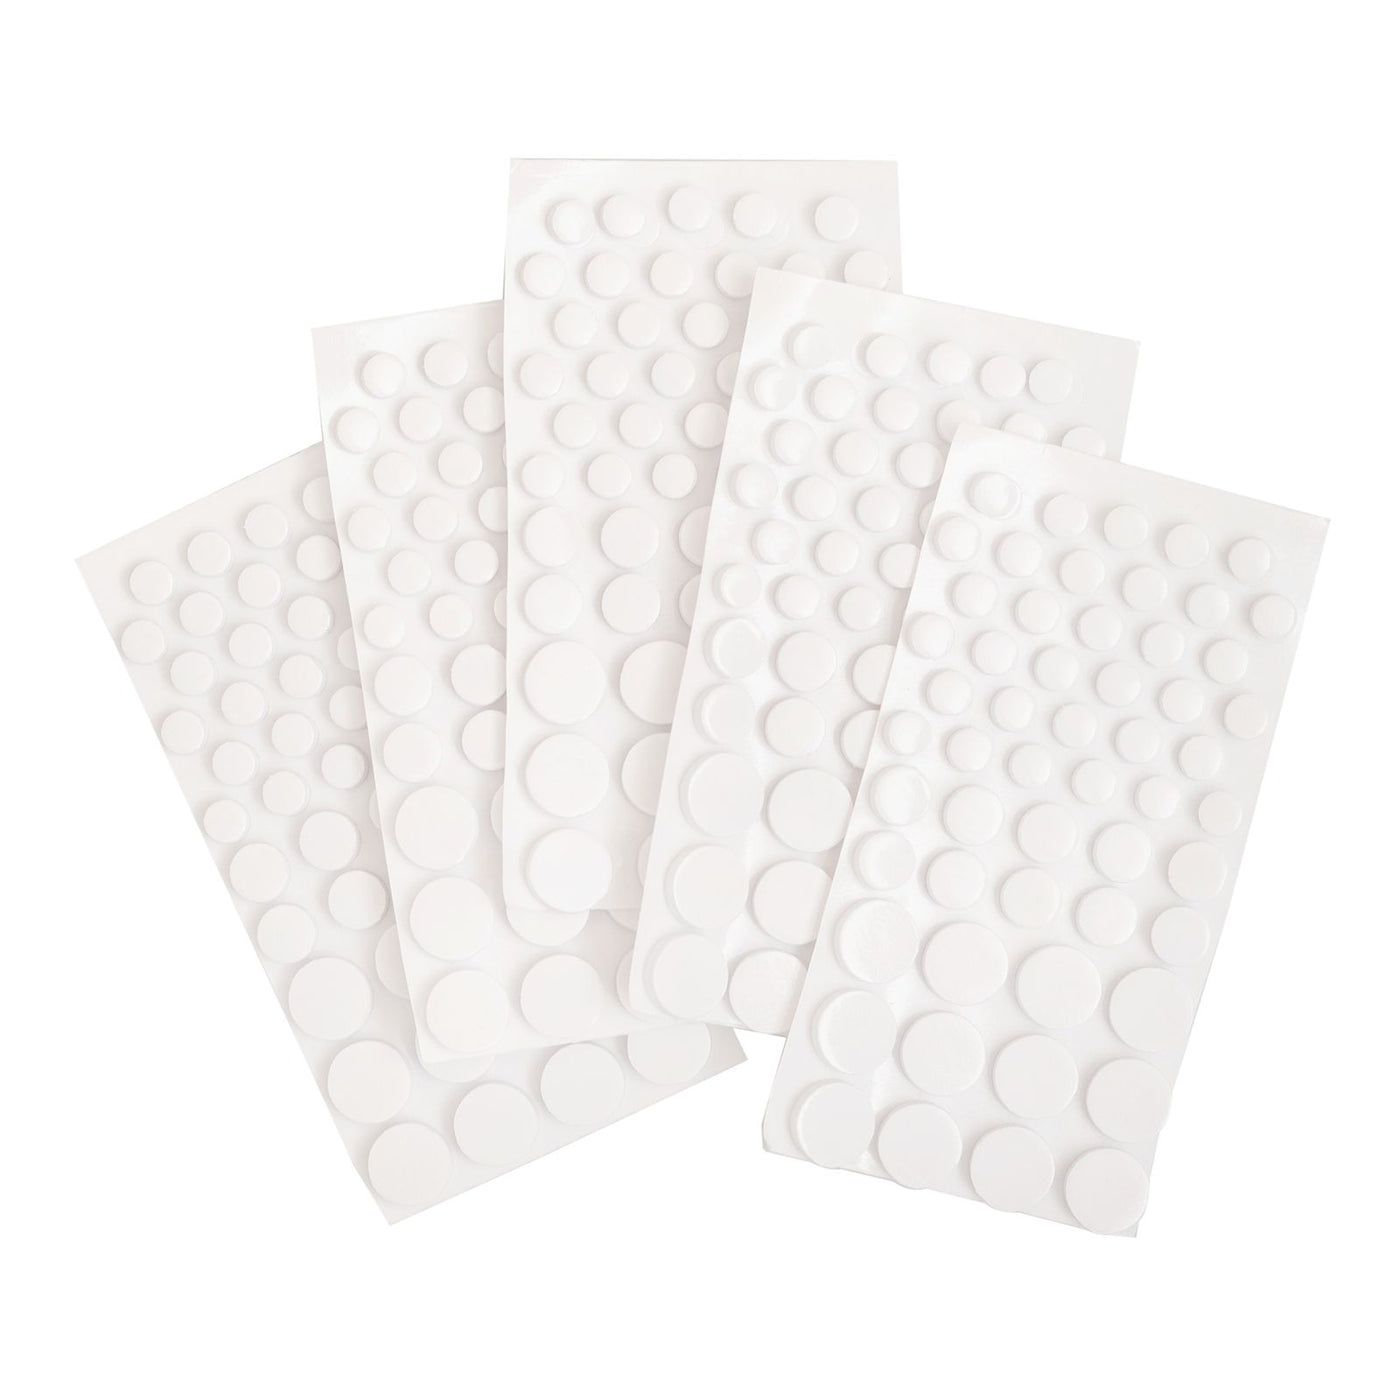 Different sizes of Sticky Thumb adhesive foam dots